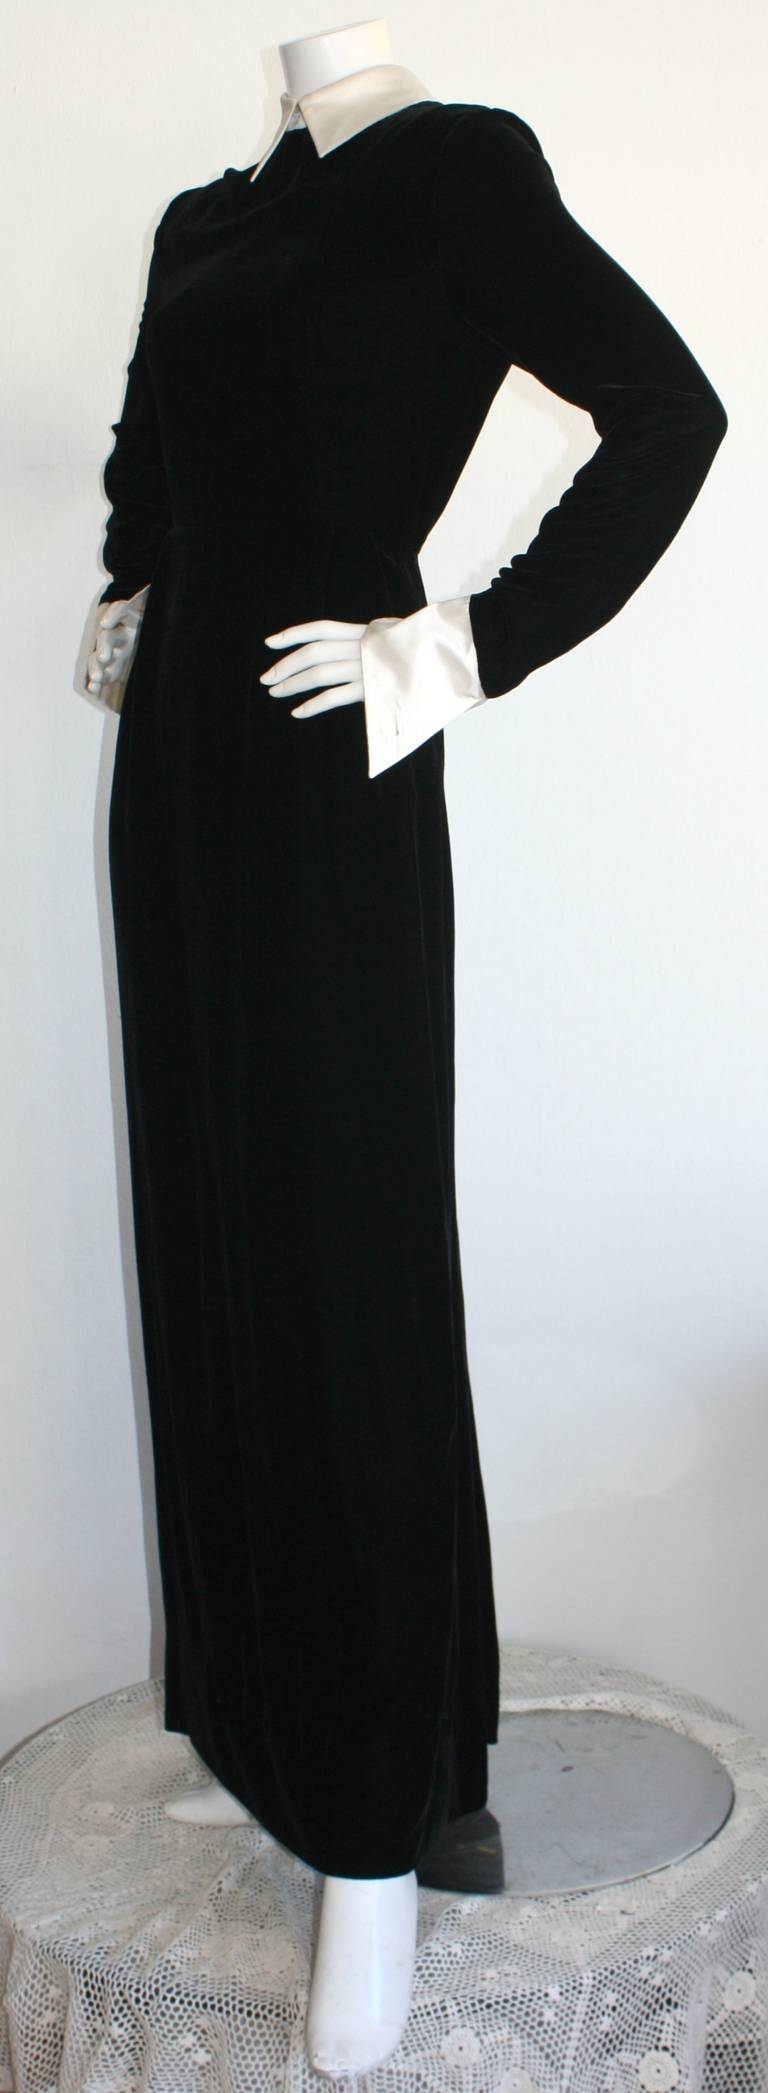 Remarkable vintage Pierre Balmain gown! Features the softest black silk/rayon velvet, with a chic white silk tuxedo collar, and angled white silk cuffs, with buttonholes to pair with your favorite cuff links (think pearl or rhinestone). In great